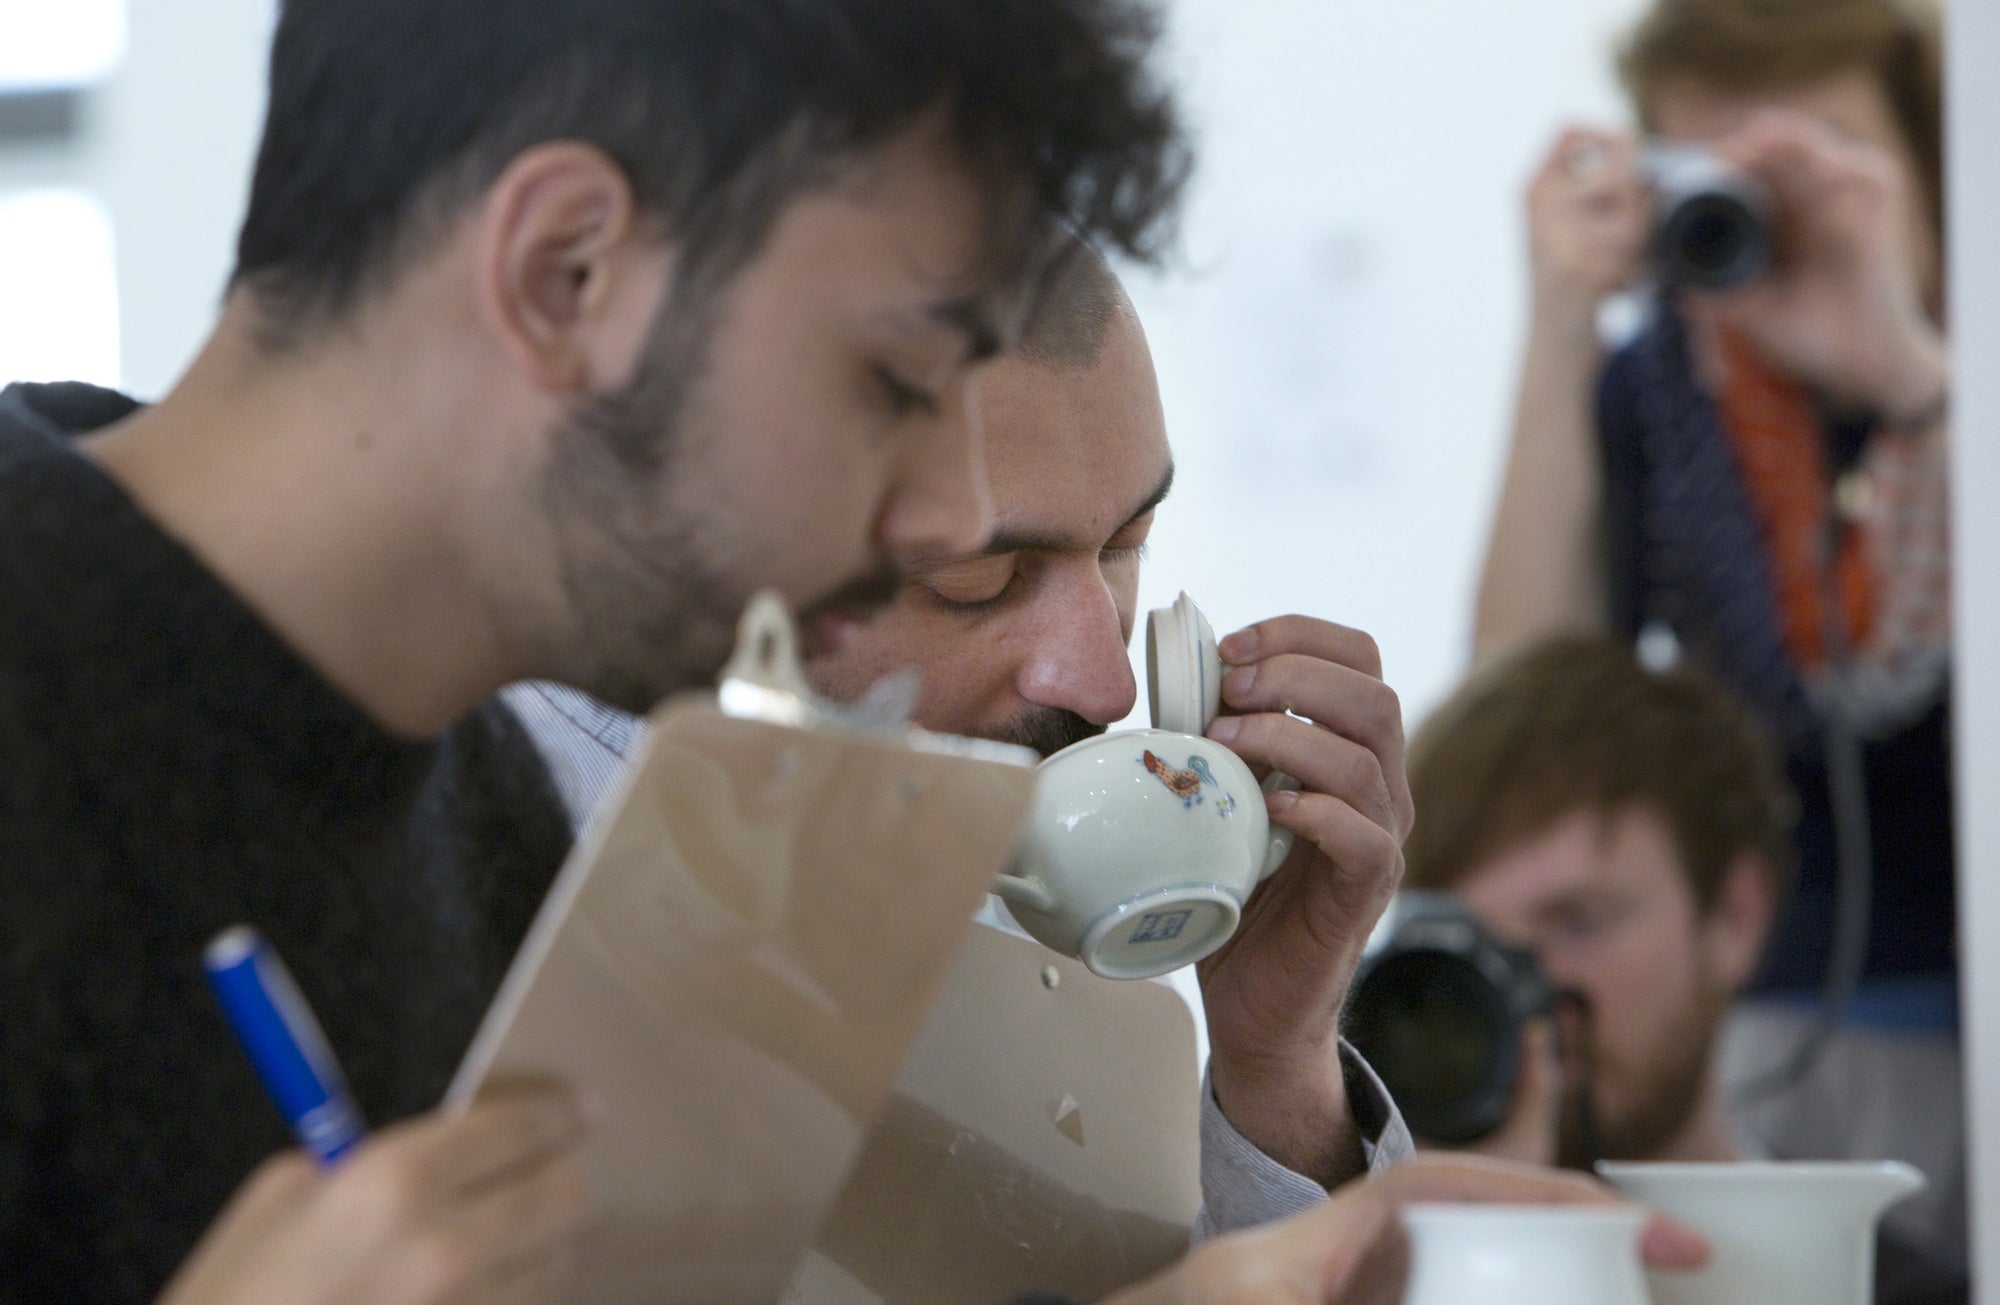 Entries are now open for The World Tea Brewers Cup